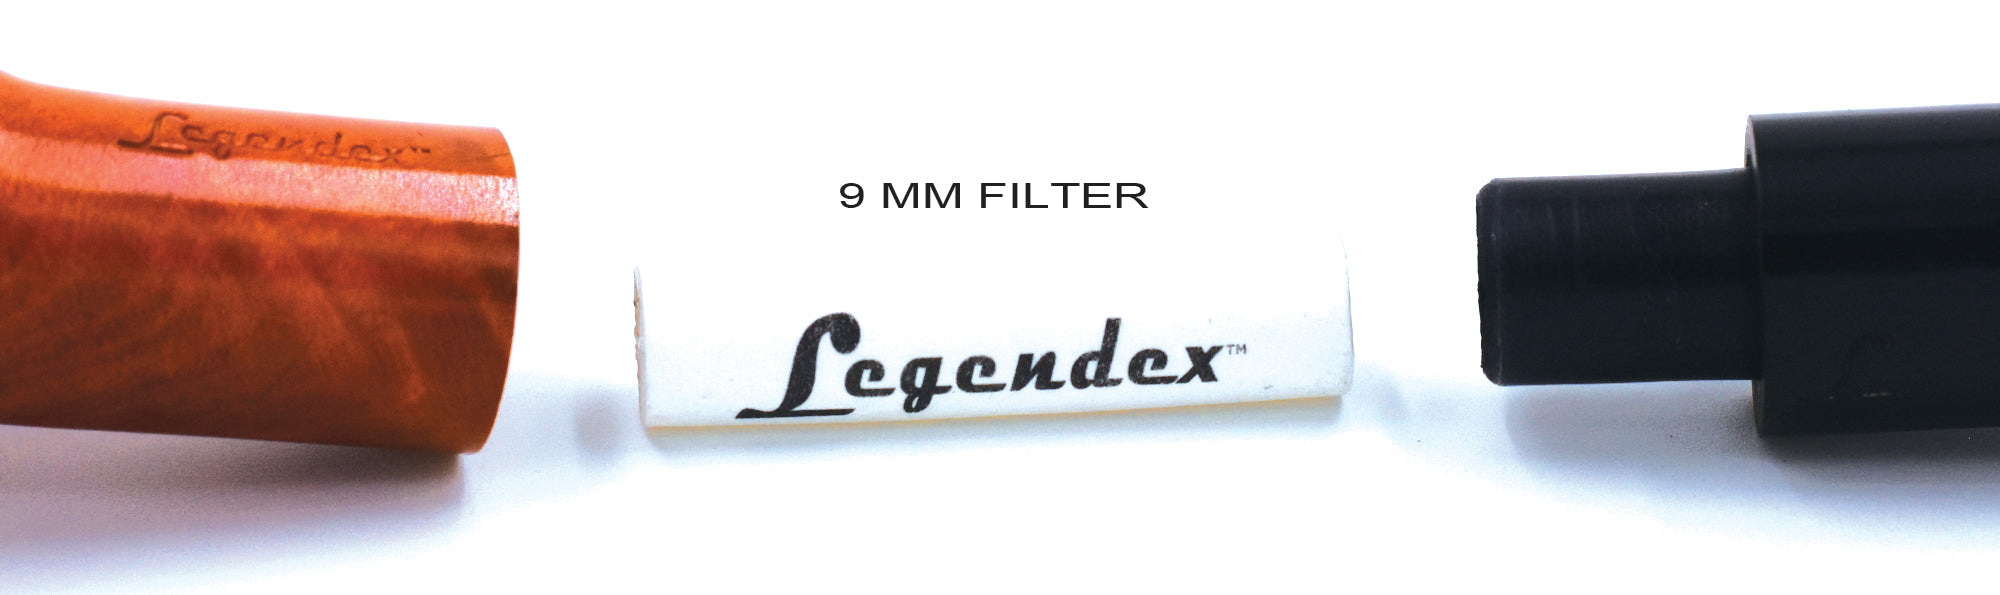 LEGENDEX® LASCALA* Plexiglass Mouthpiece 9 MM Filtered Briar Smoking Pipe Made In Italy 01-08-703